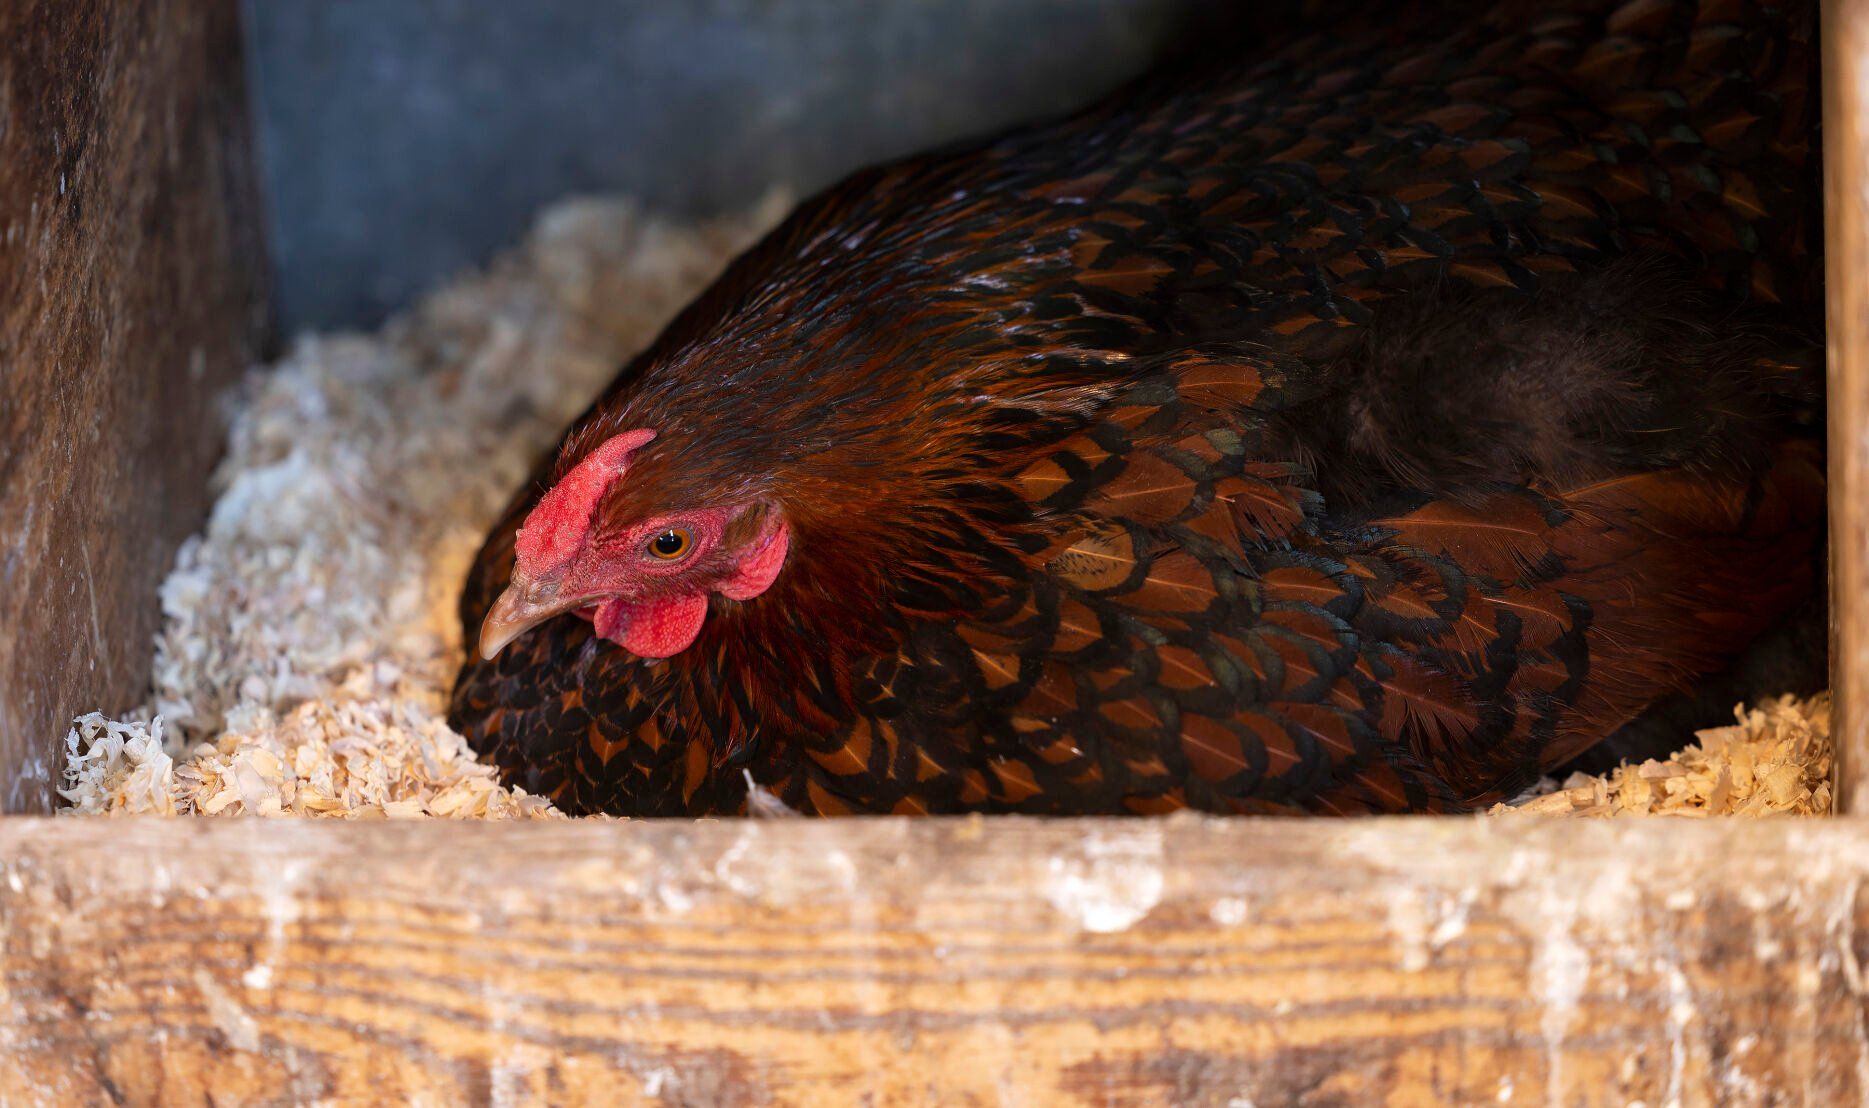 A chicken sits on her eggs at Oak Hollow Farm in rural Platteville, Wis., on Friday, Feb. 17, 2023.    PHOTO CREDIT: Stephen Gassman
Telegraph Herald